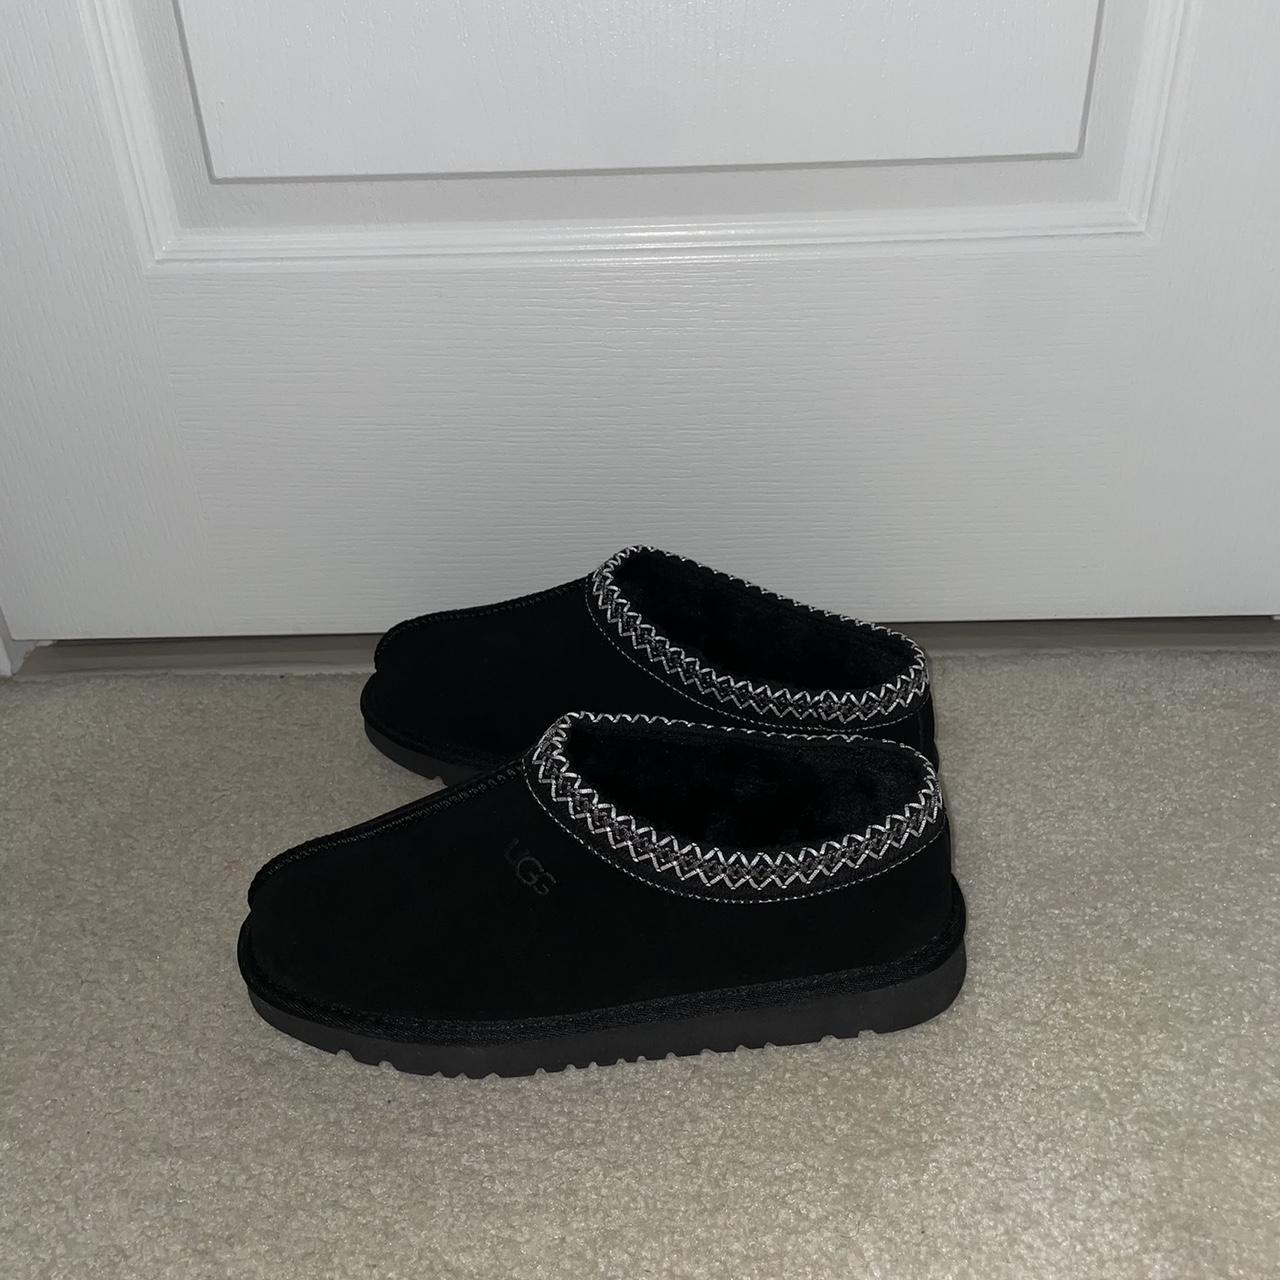 Black ugg tasman slippers, new and have only been... - Depop